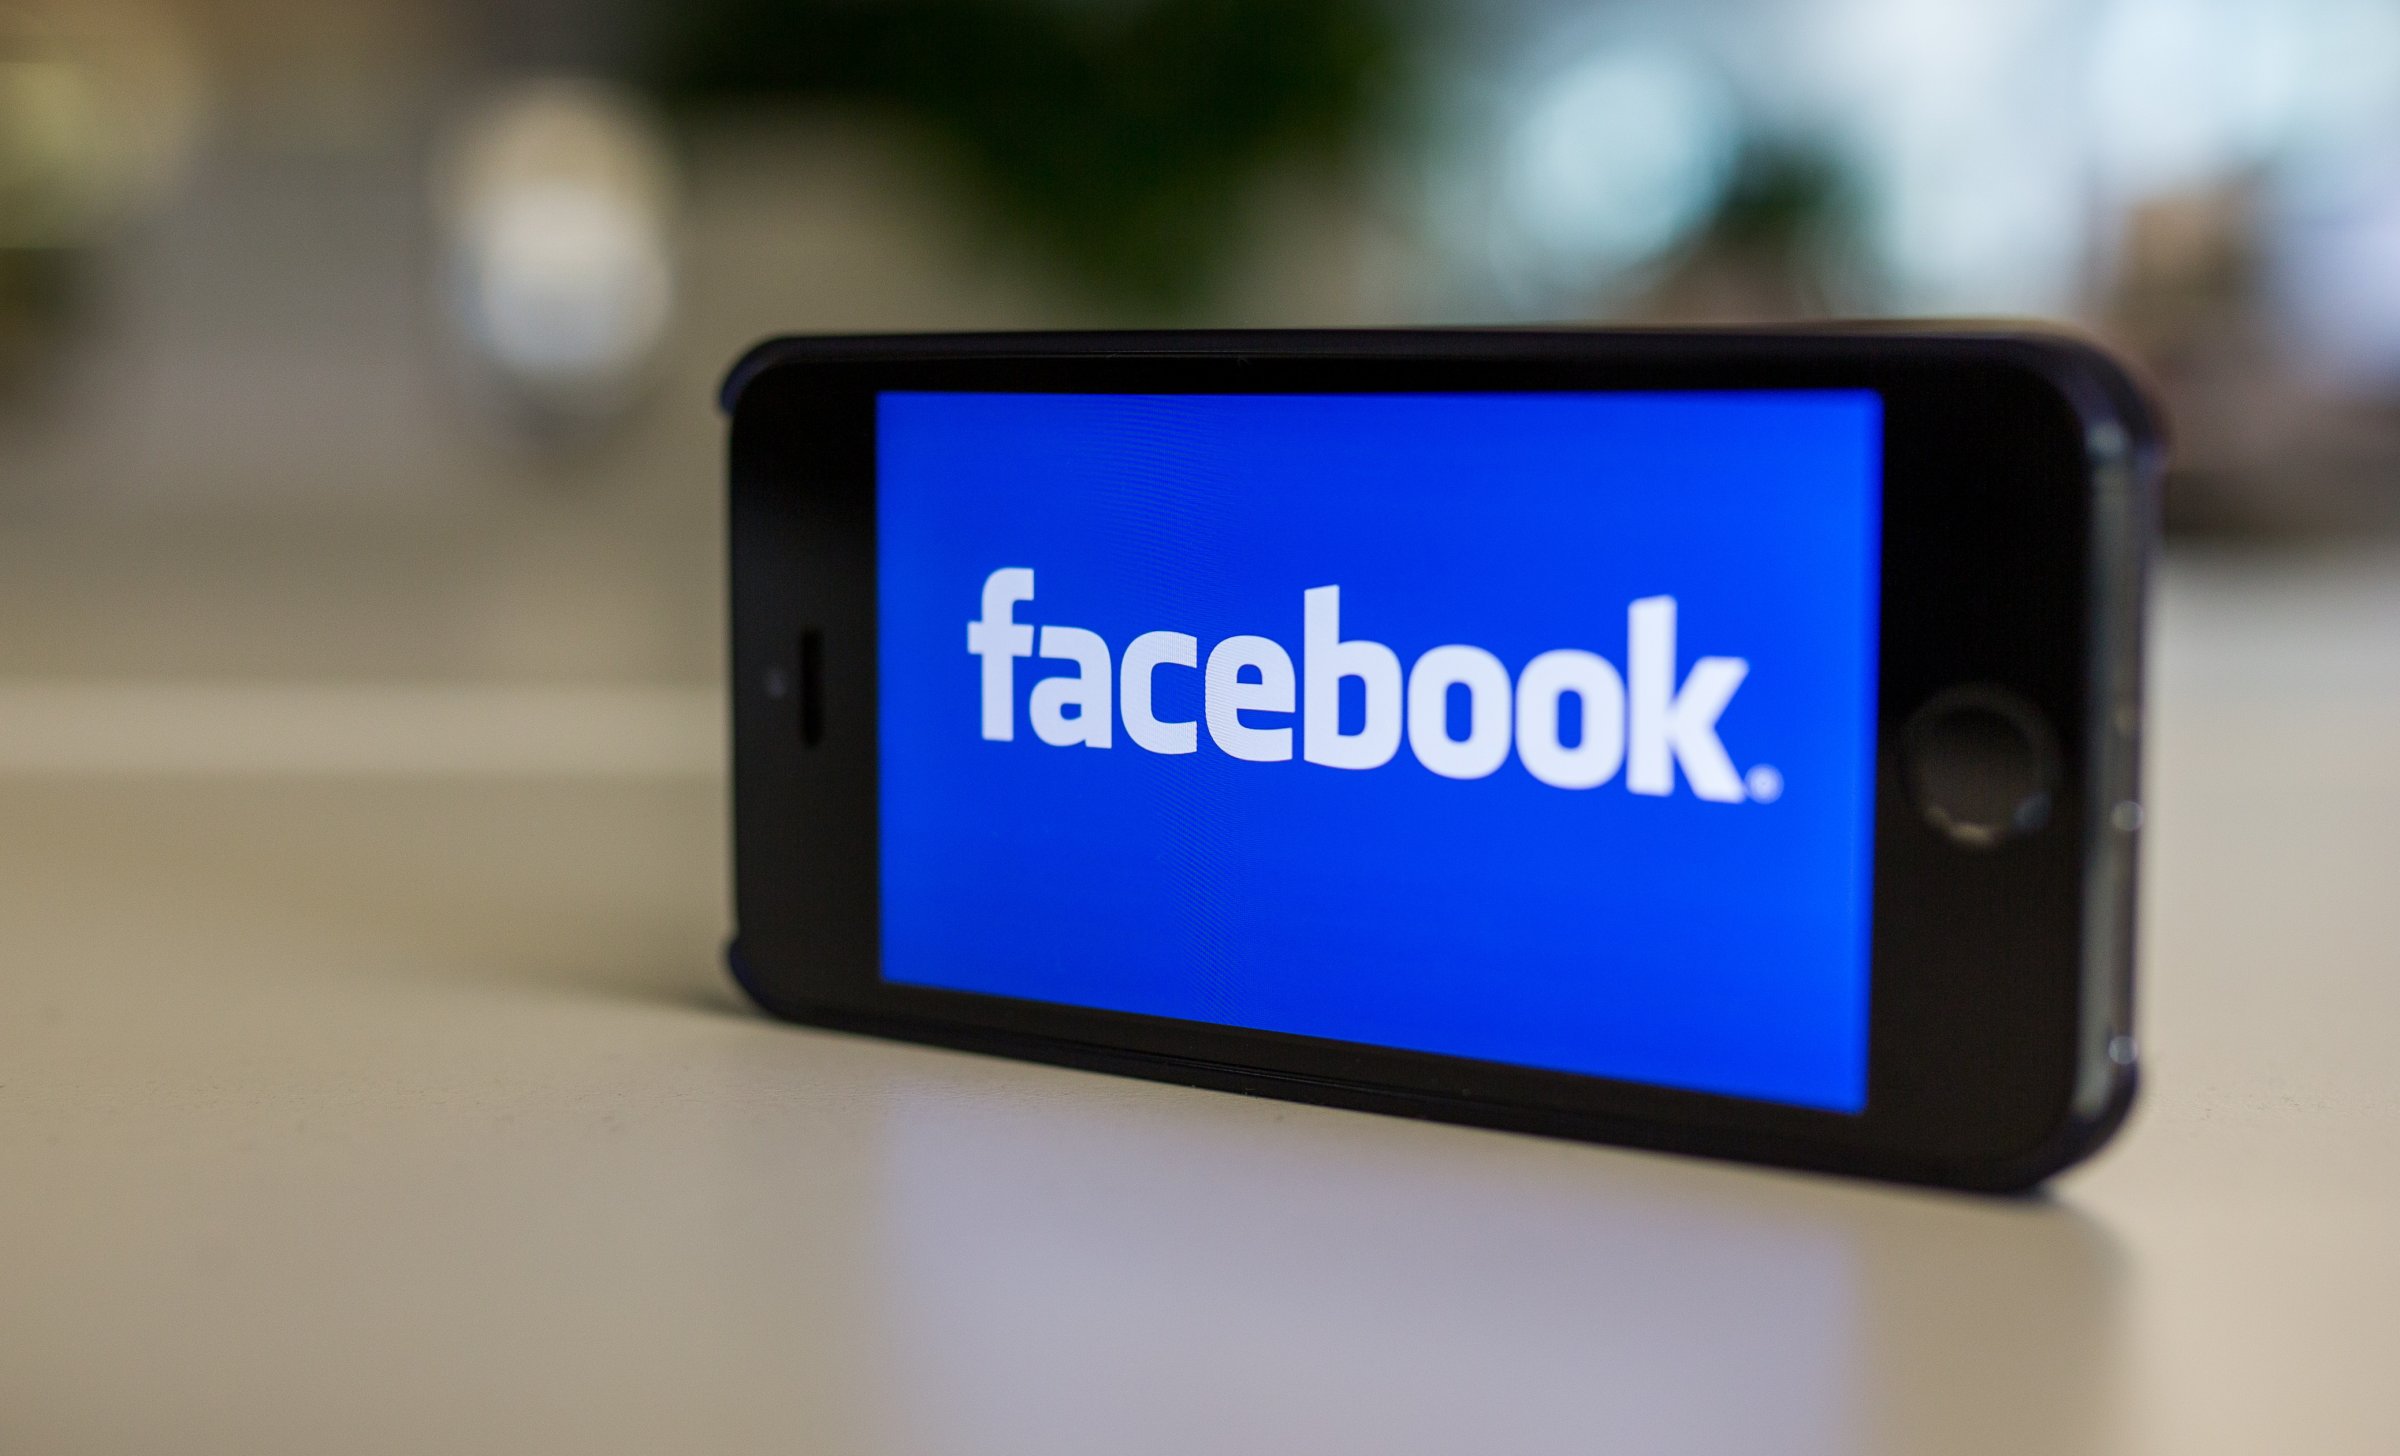 Facebook logo shown on an iPhone 5s.